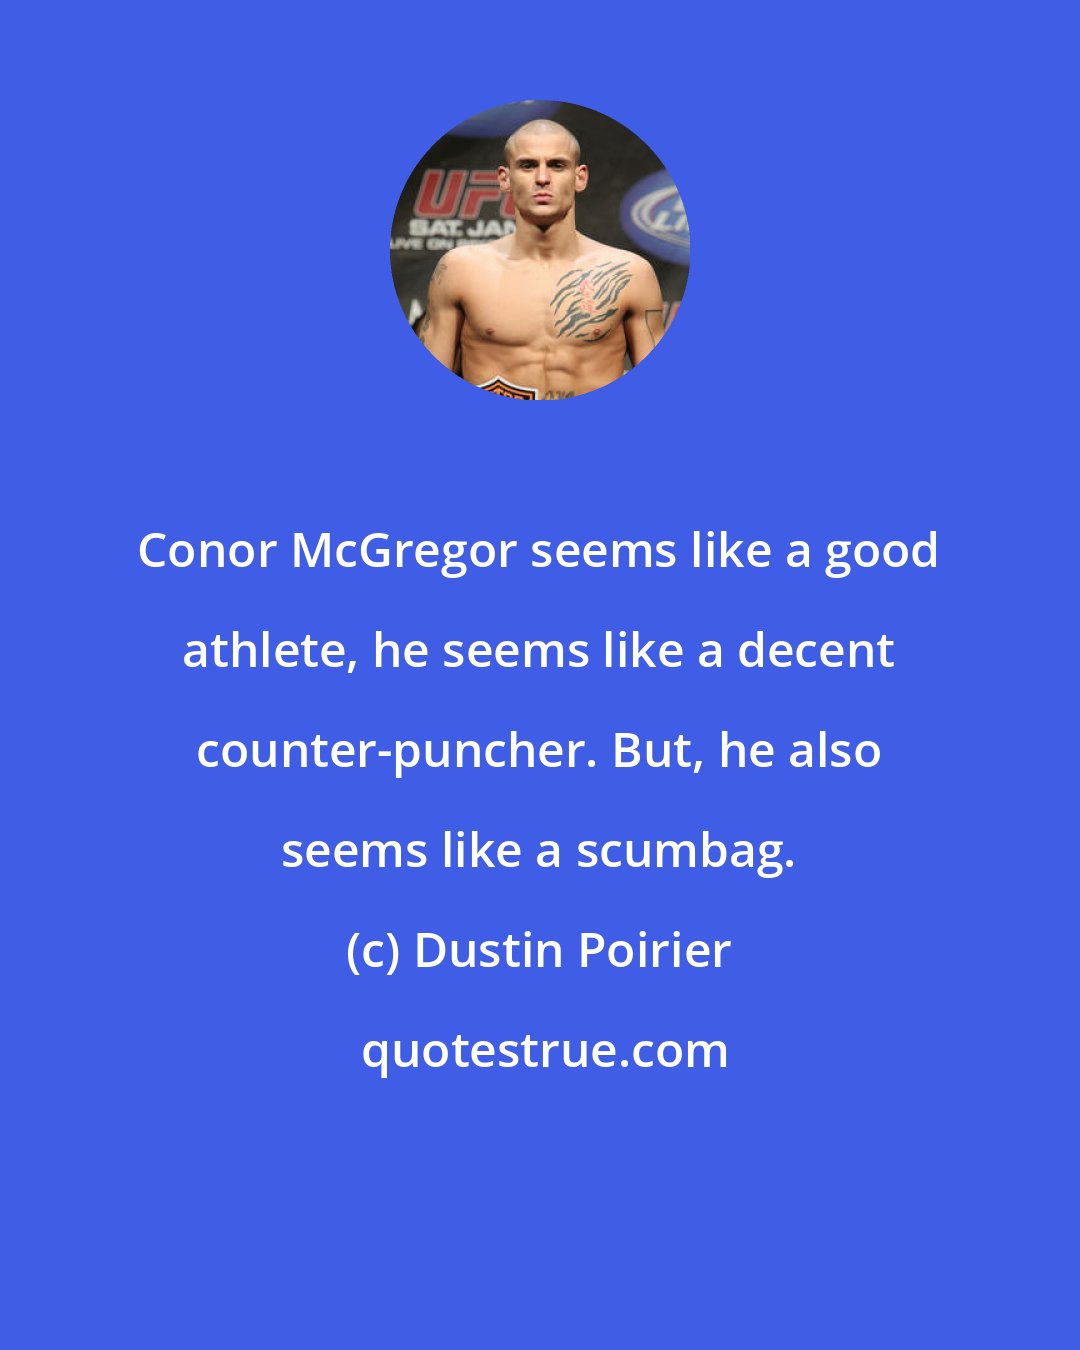 Dustin Poirier: Conor McGregor seems like a good athlete, he seems like a decent counter-puncher. But, he also seems like a scumbag.